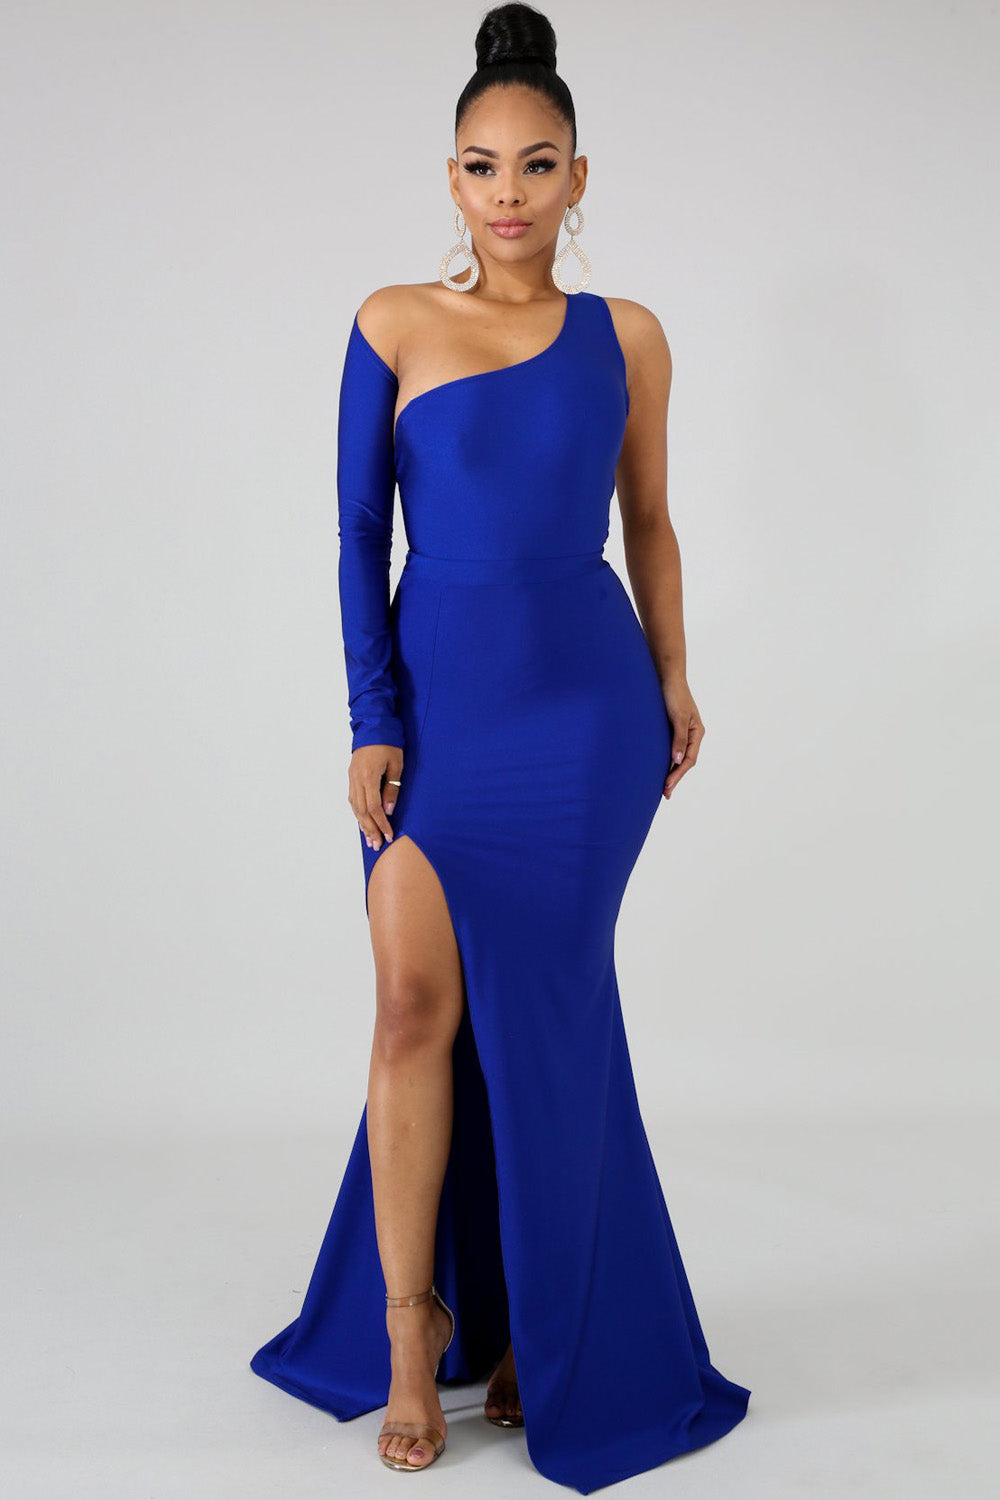 goPals full length royal blue dress with single long sleeve, open back and thigh high slit. 